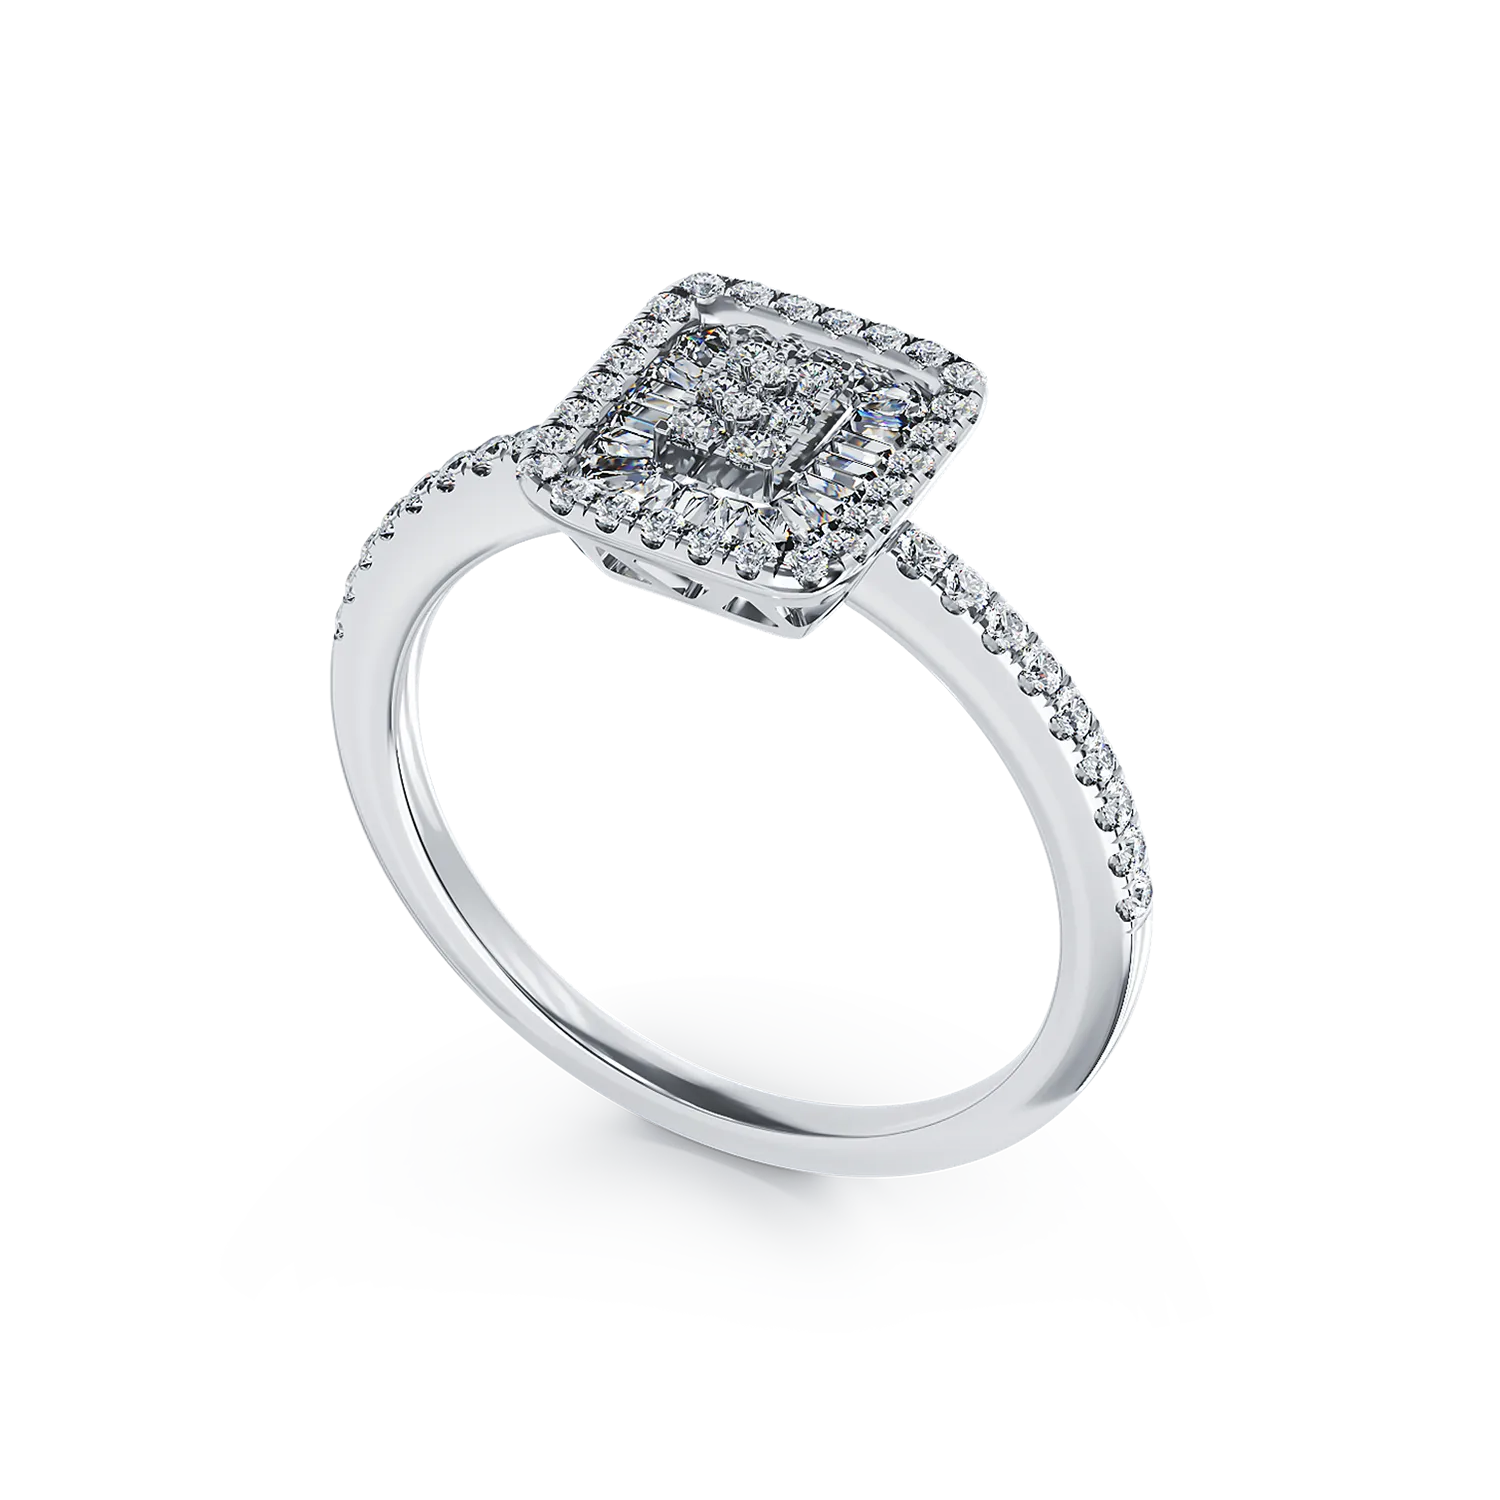 18K white gold engagement ring with 0.26ct diamonds